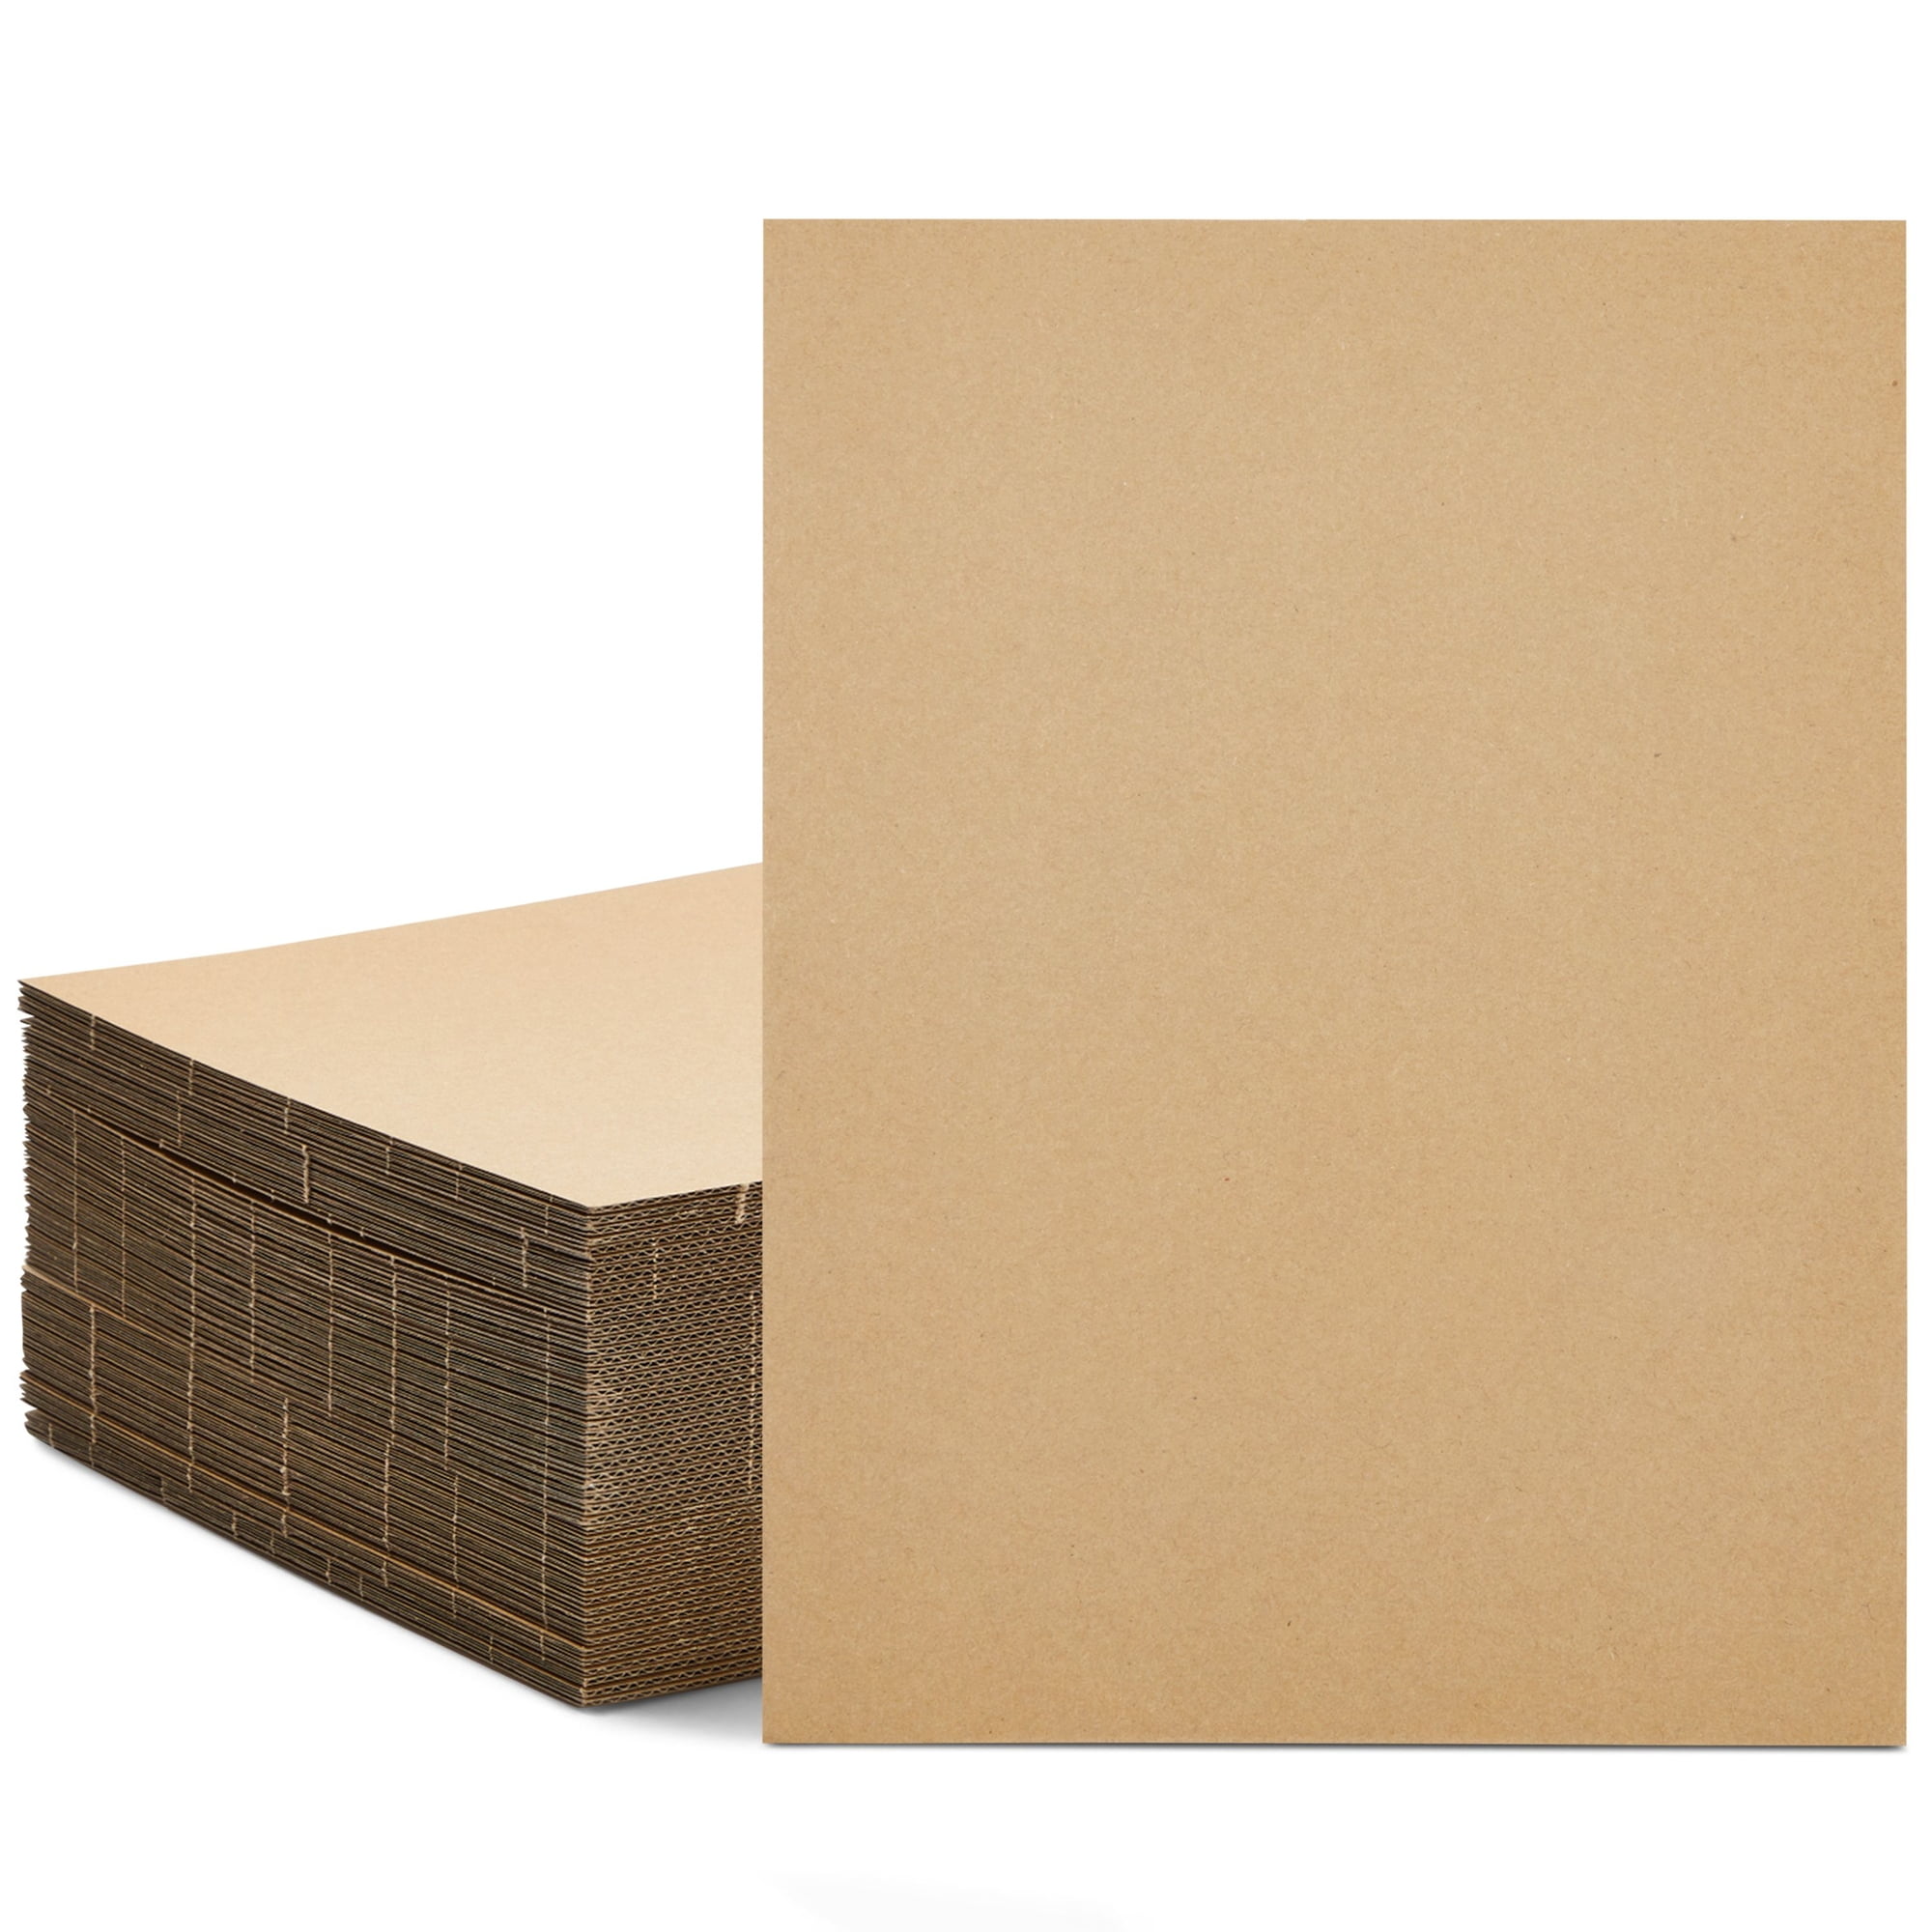 Cardboard Sheets Carton/Shipping Sheet Large Craft Paper Thick Flat Card  Board Inserts for Packing Shipping Crafts Mailing (4 Metre)